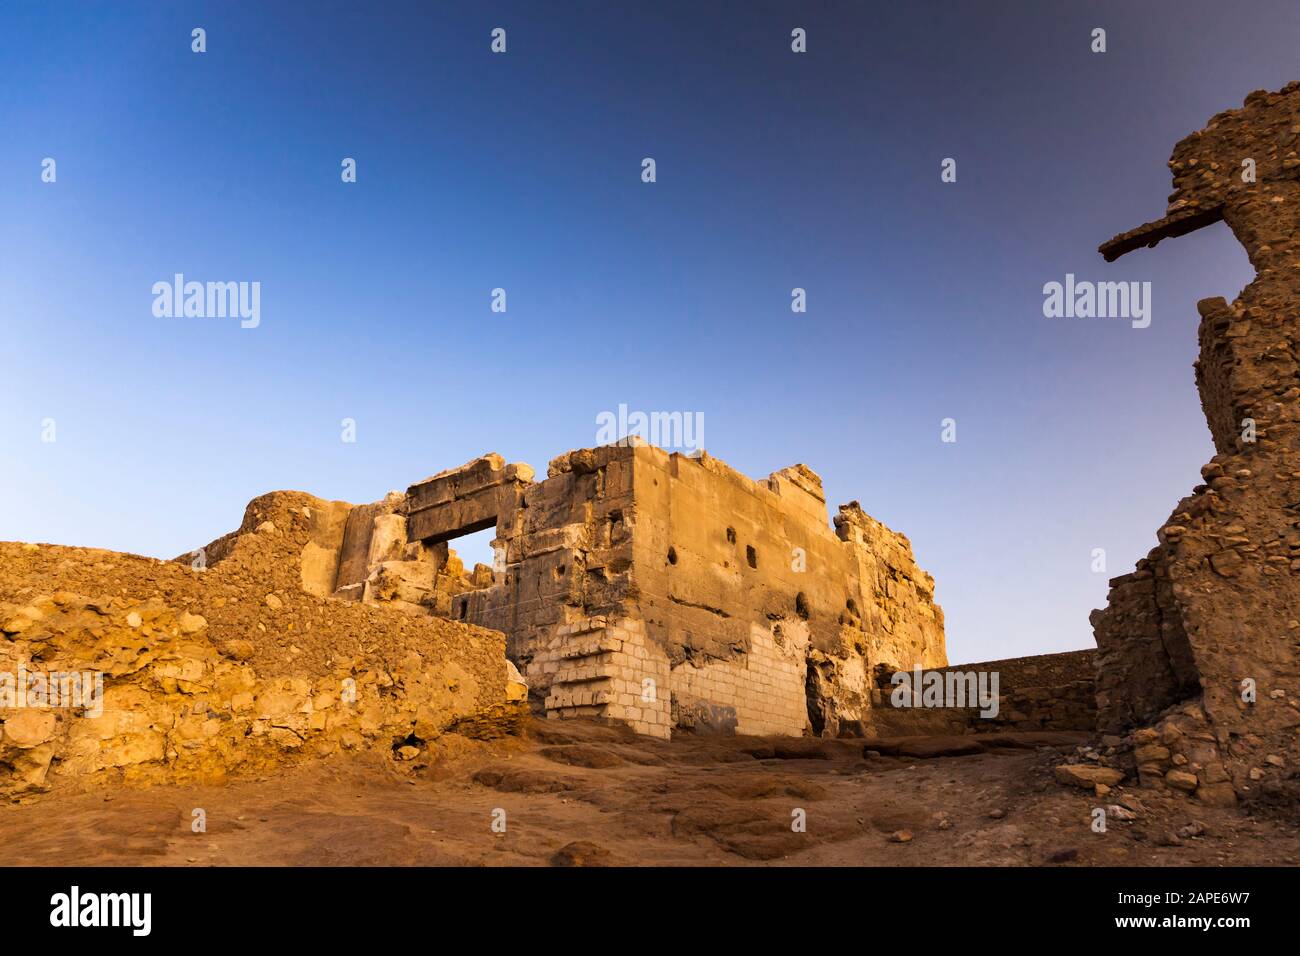 Morning glow, at Temple oracle of Amun, Gebel el-Dakrour, Siwa Oasis, Siwa, Egypt, North Africa, Africa Stock Photo